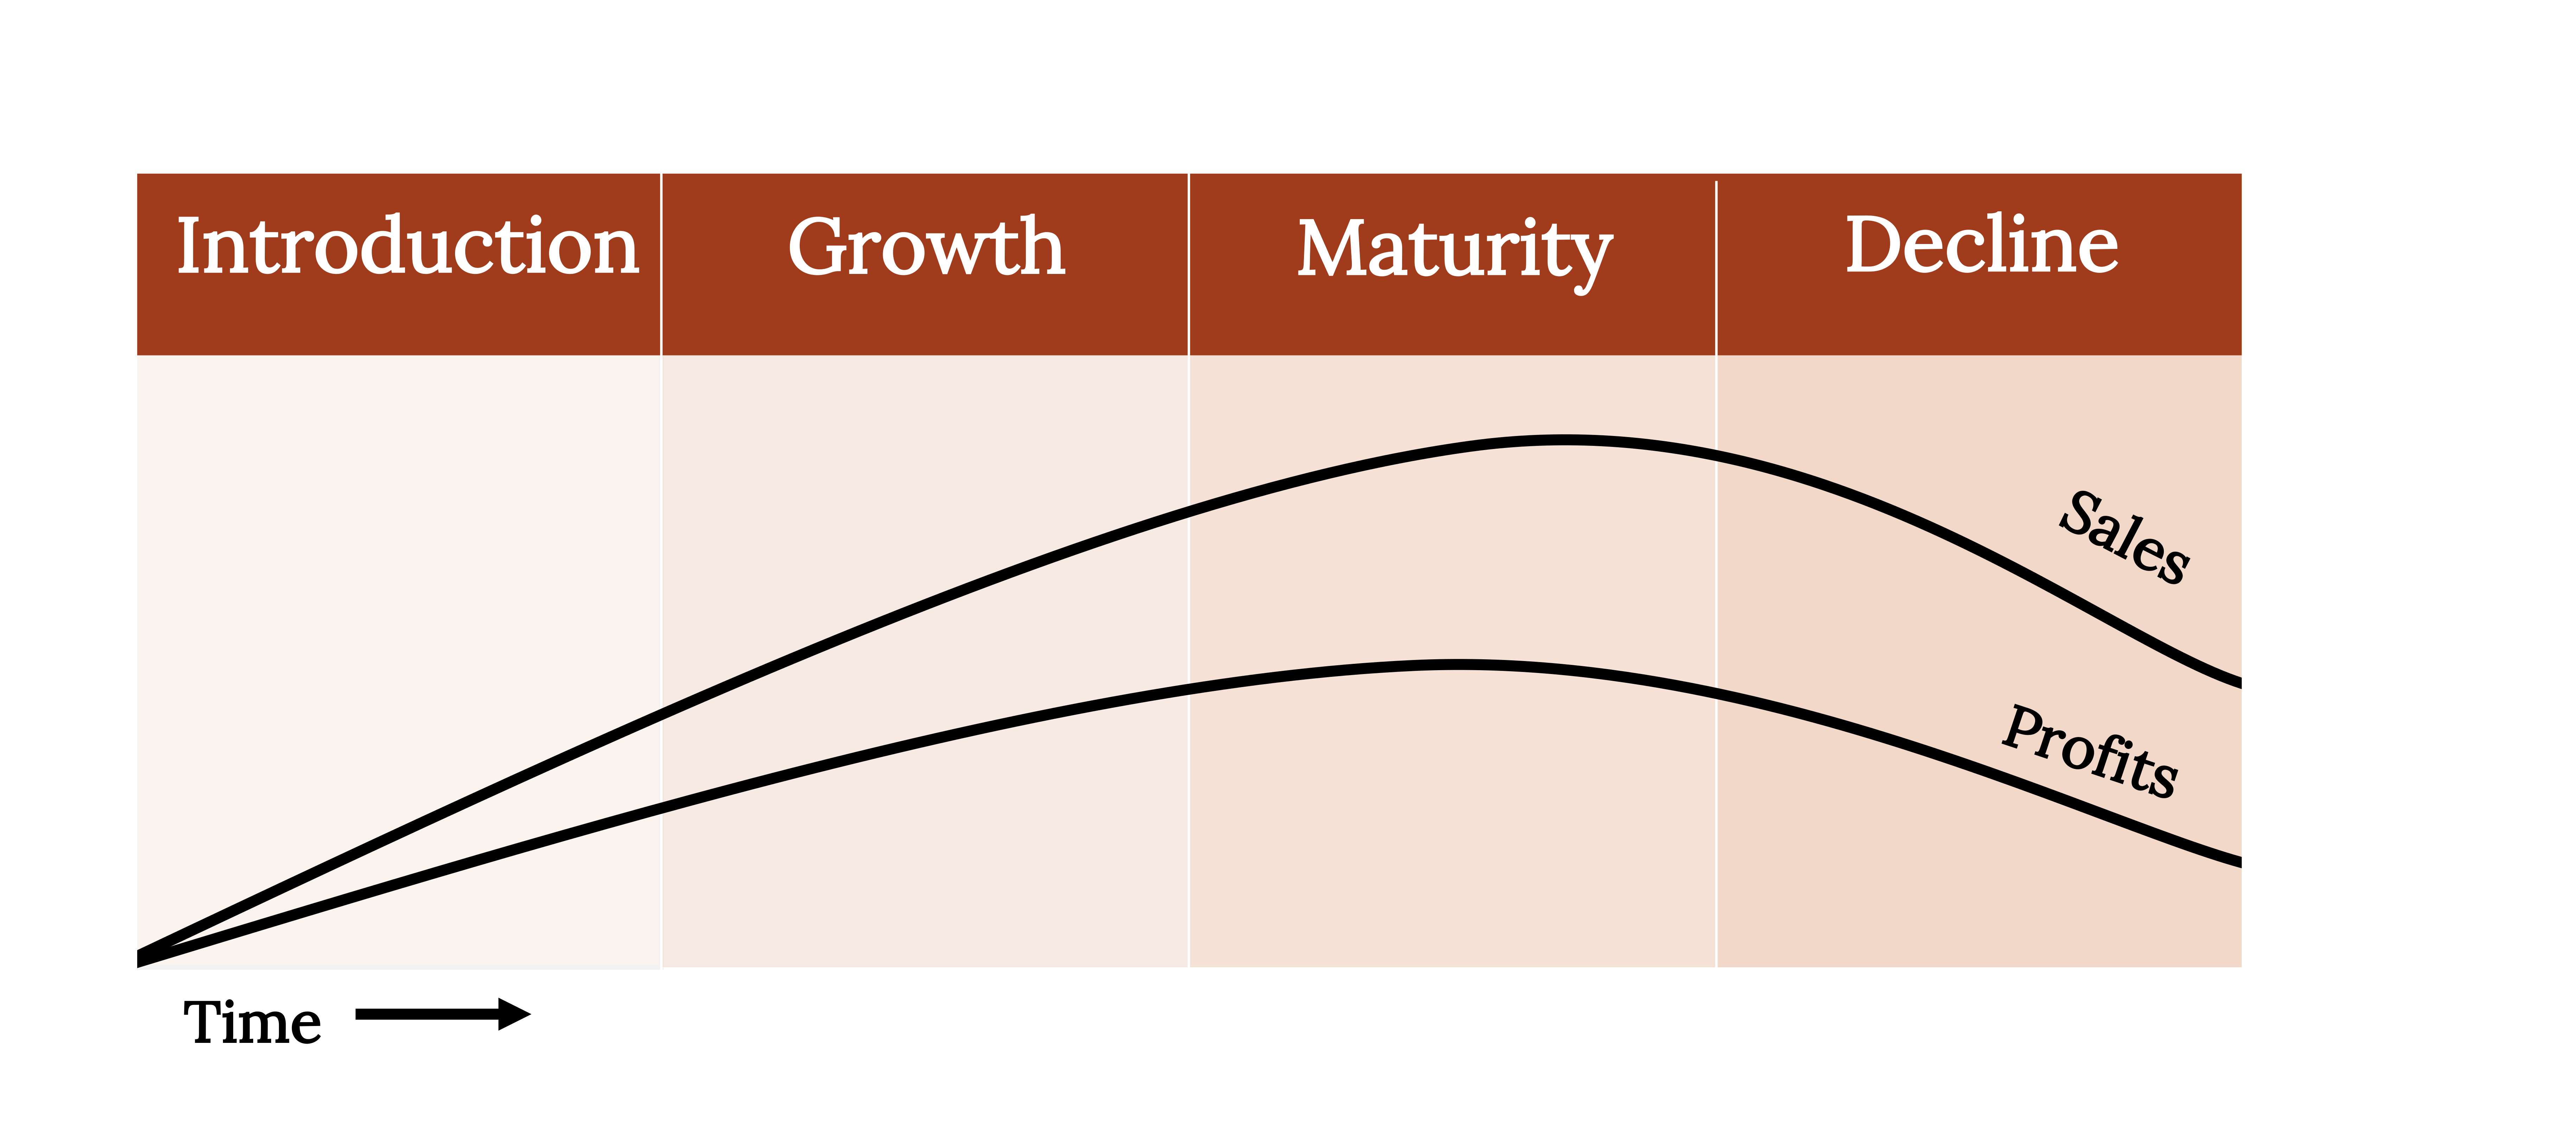 A graph of the Product Life Cycle. Four vertical rectangles are laid horizontally, labeled from left to right: Introduction, Growth, Maturity, and Decline. A line labeled Sales begins at 0 in the Introduction box, slowly comes to a rounded peak near the end of Maturity, then drops down slightly in Decline. A second line labeled Profits begins at 0 in the Introduction box, slowly comes to a rounded peak beneath the Sales line in Maturity, and drops down in Decline below the Sales line.